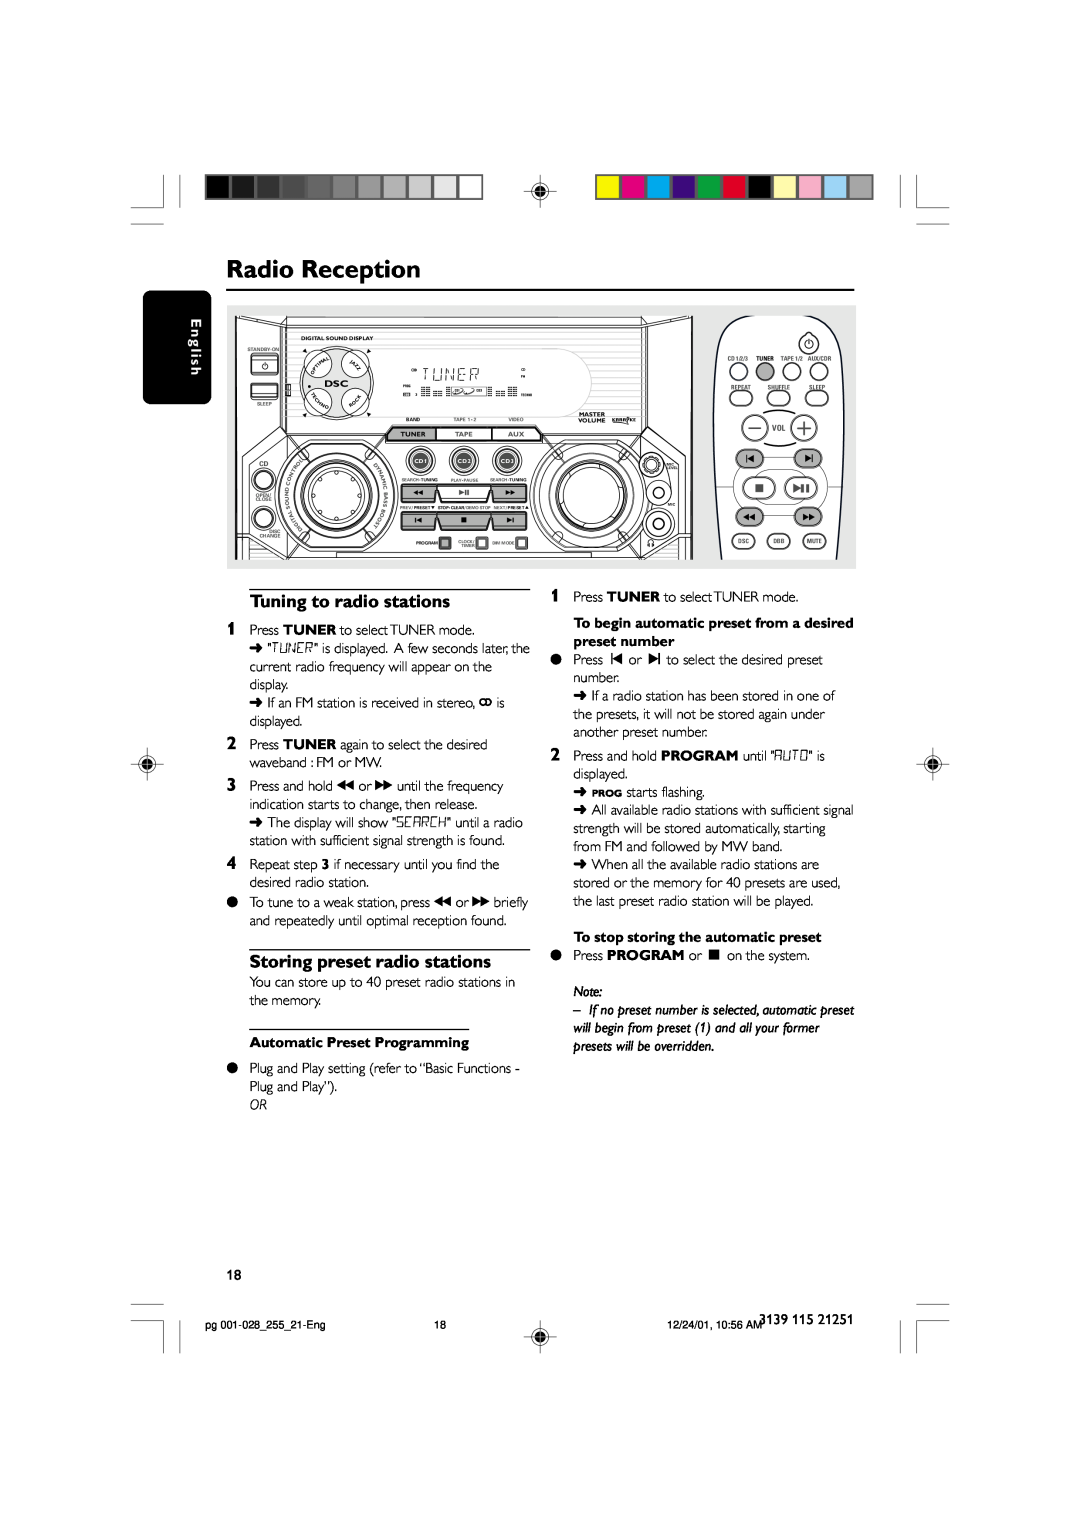 Philips C255 manual Radio Reception, preset number, To stop storing the automatic preset, Automatic Preset Programming 